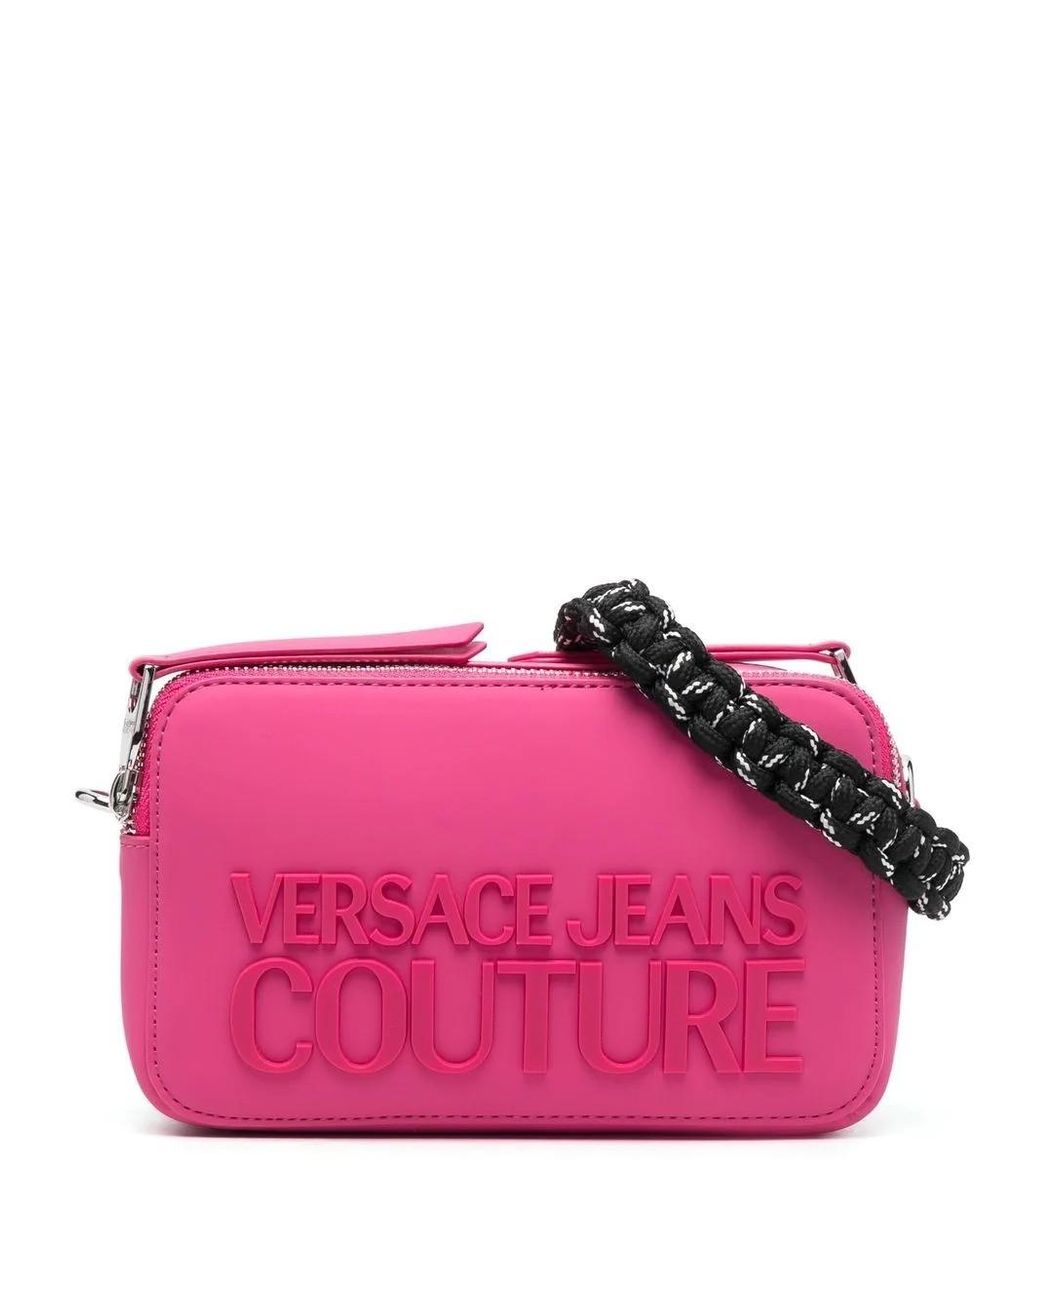 Versace Jeans Couture Synthetic Cross-body Bag in Fuchsia Pink Womens Bags Crossbody bags and purses 